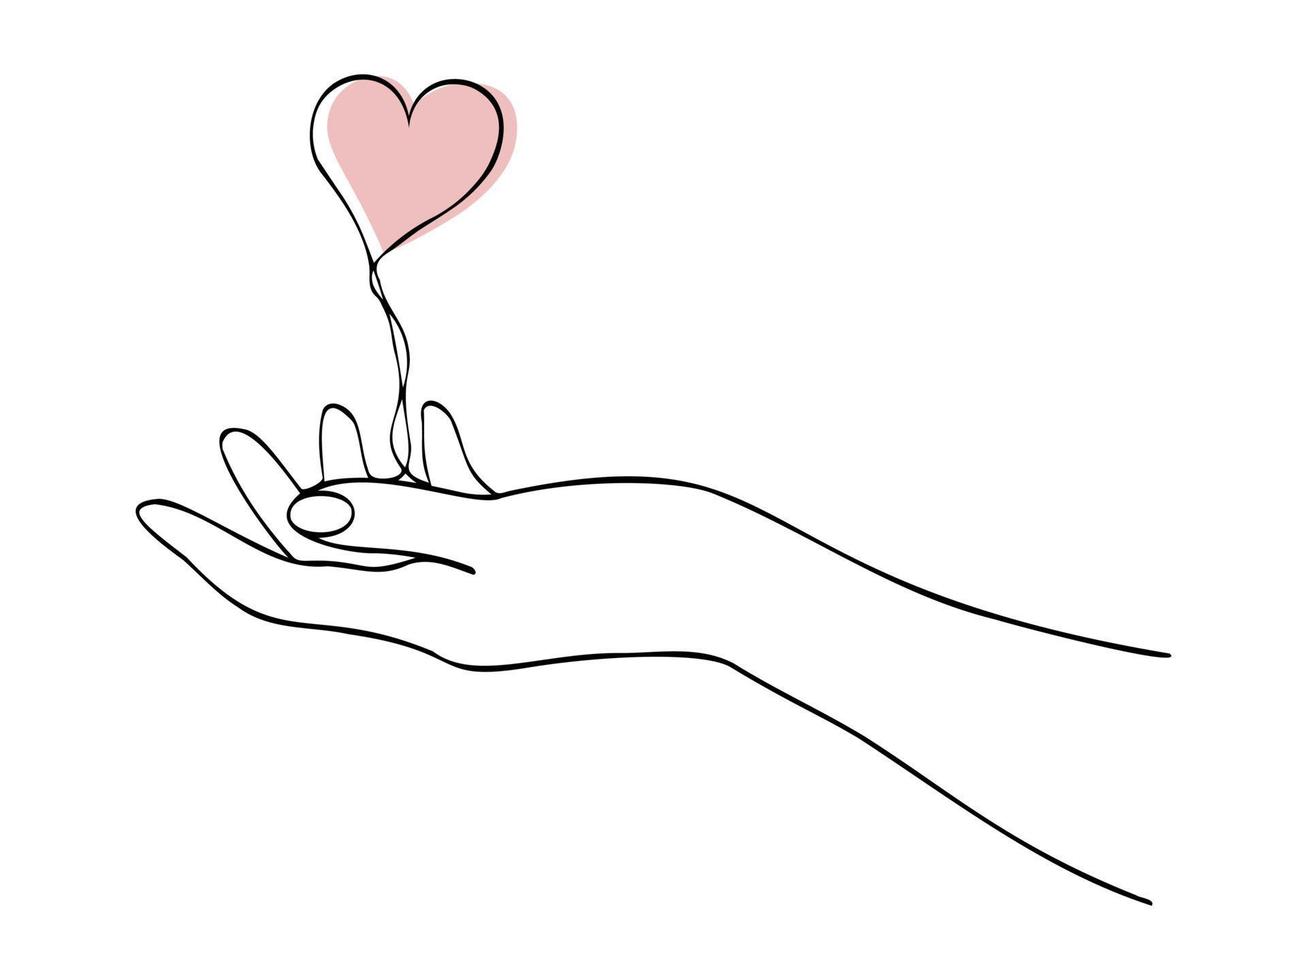 Continuous one line drawing with hand and heart. Hand holding heart. Vector illustration. Black line art on white background.